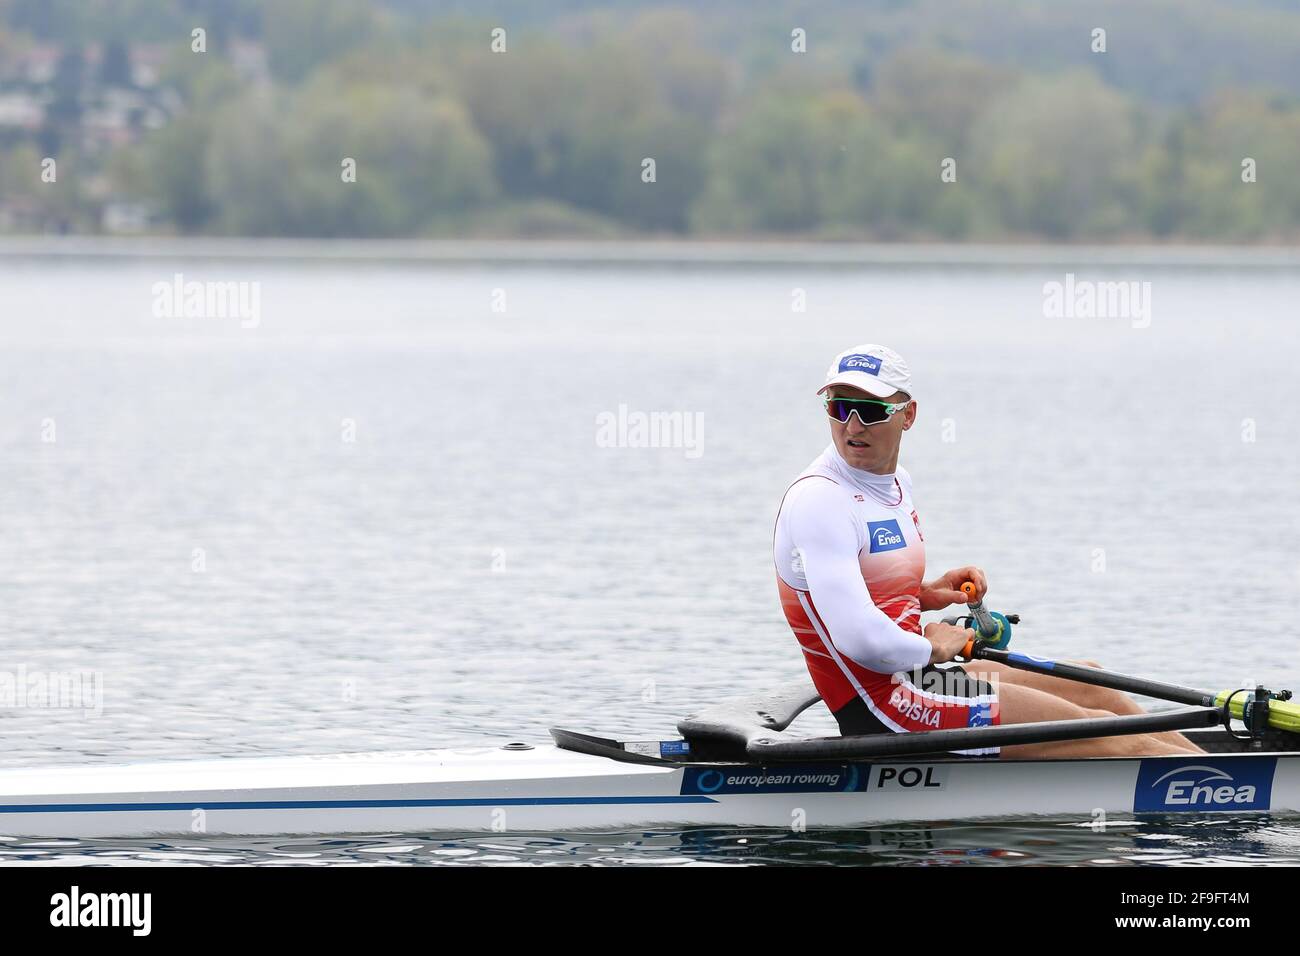 World European Championships High Resolution Stock Photography and Images -  Alamy